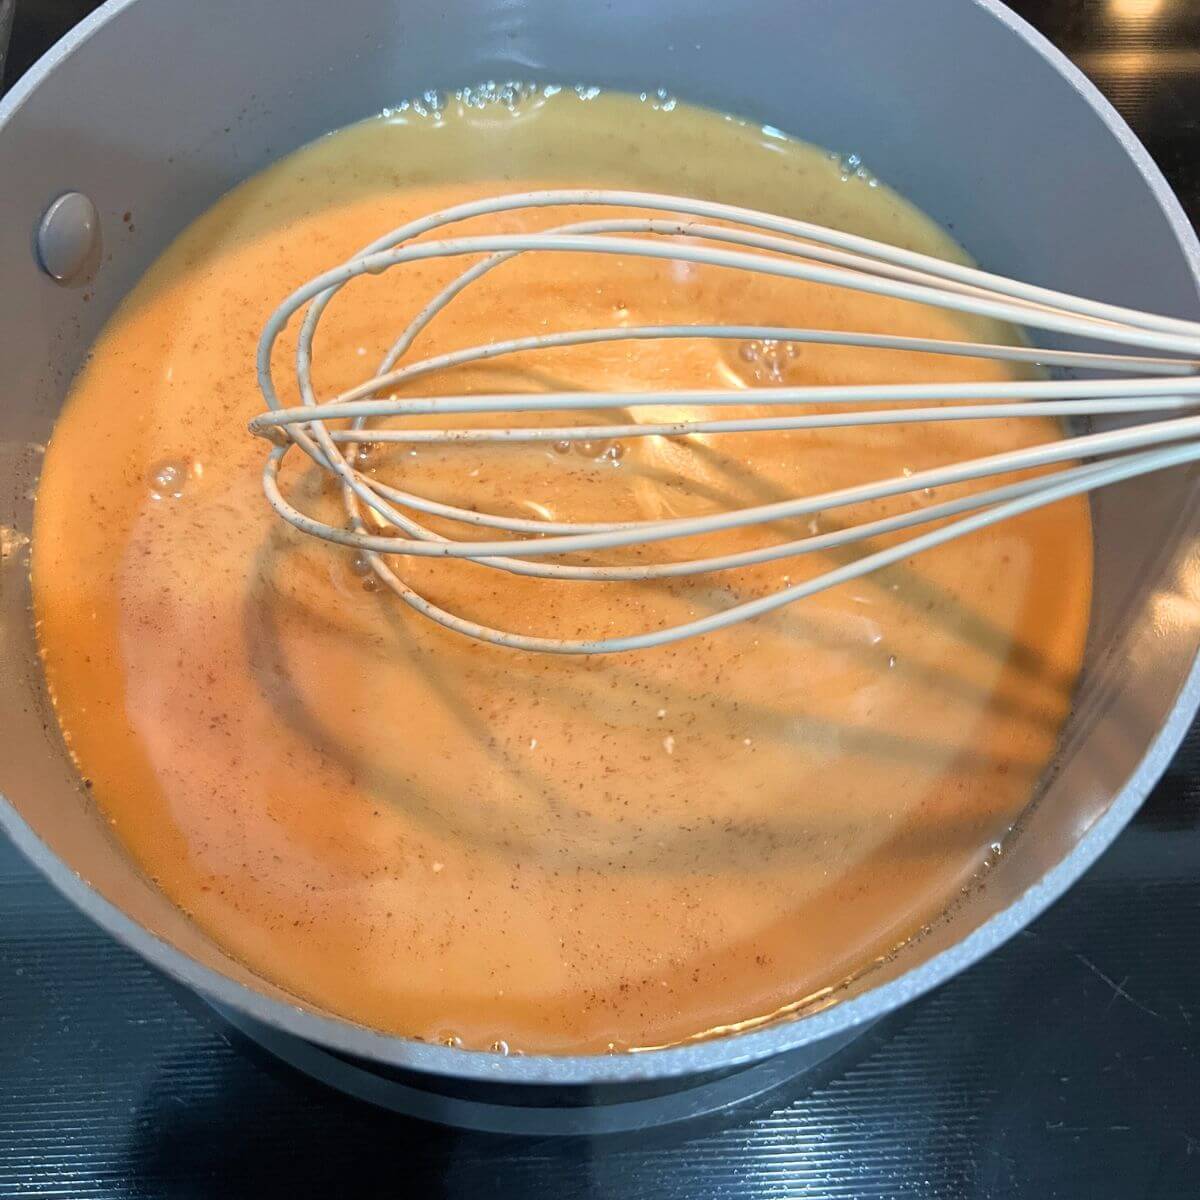 Whisk the mixture every 30 seconds to ensure well combined.